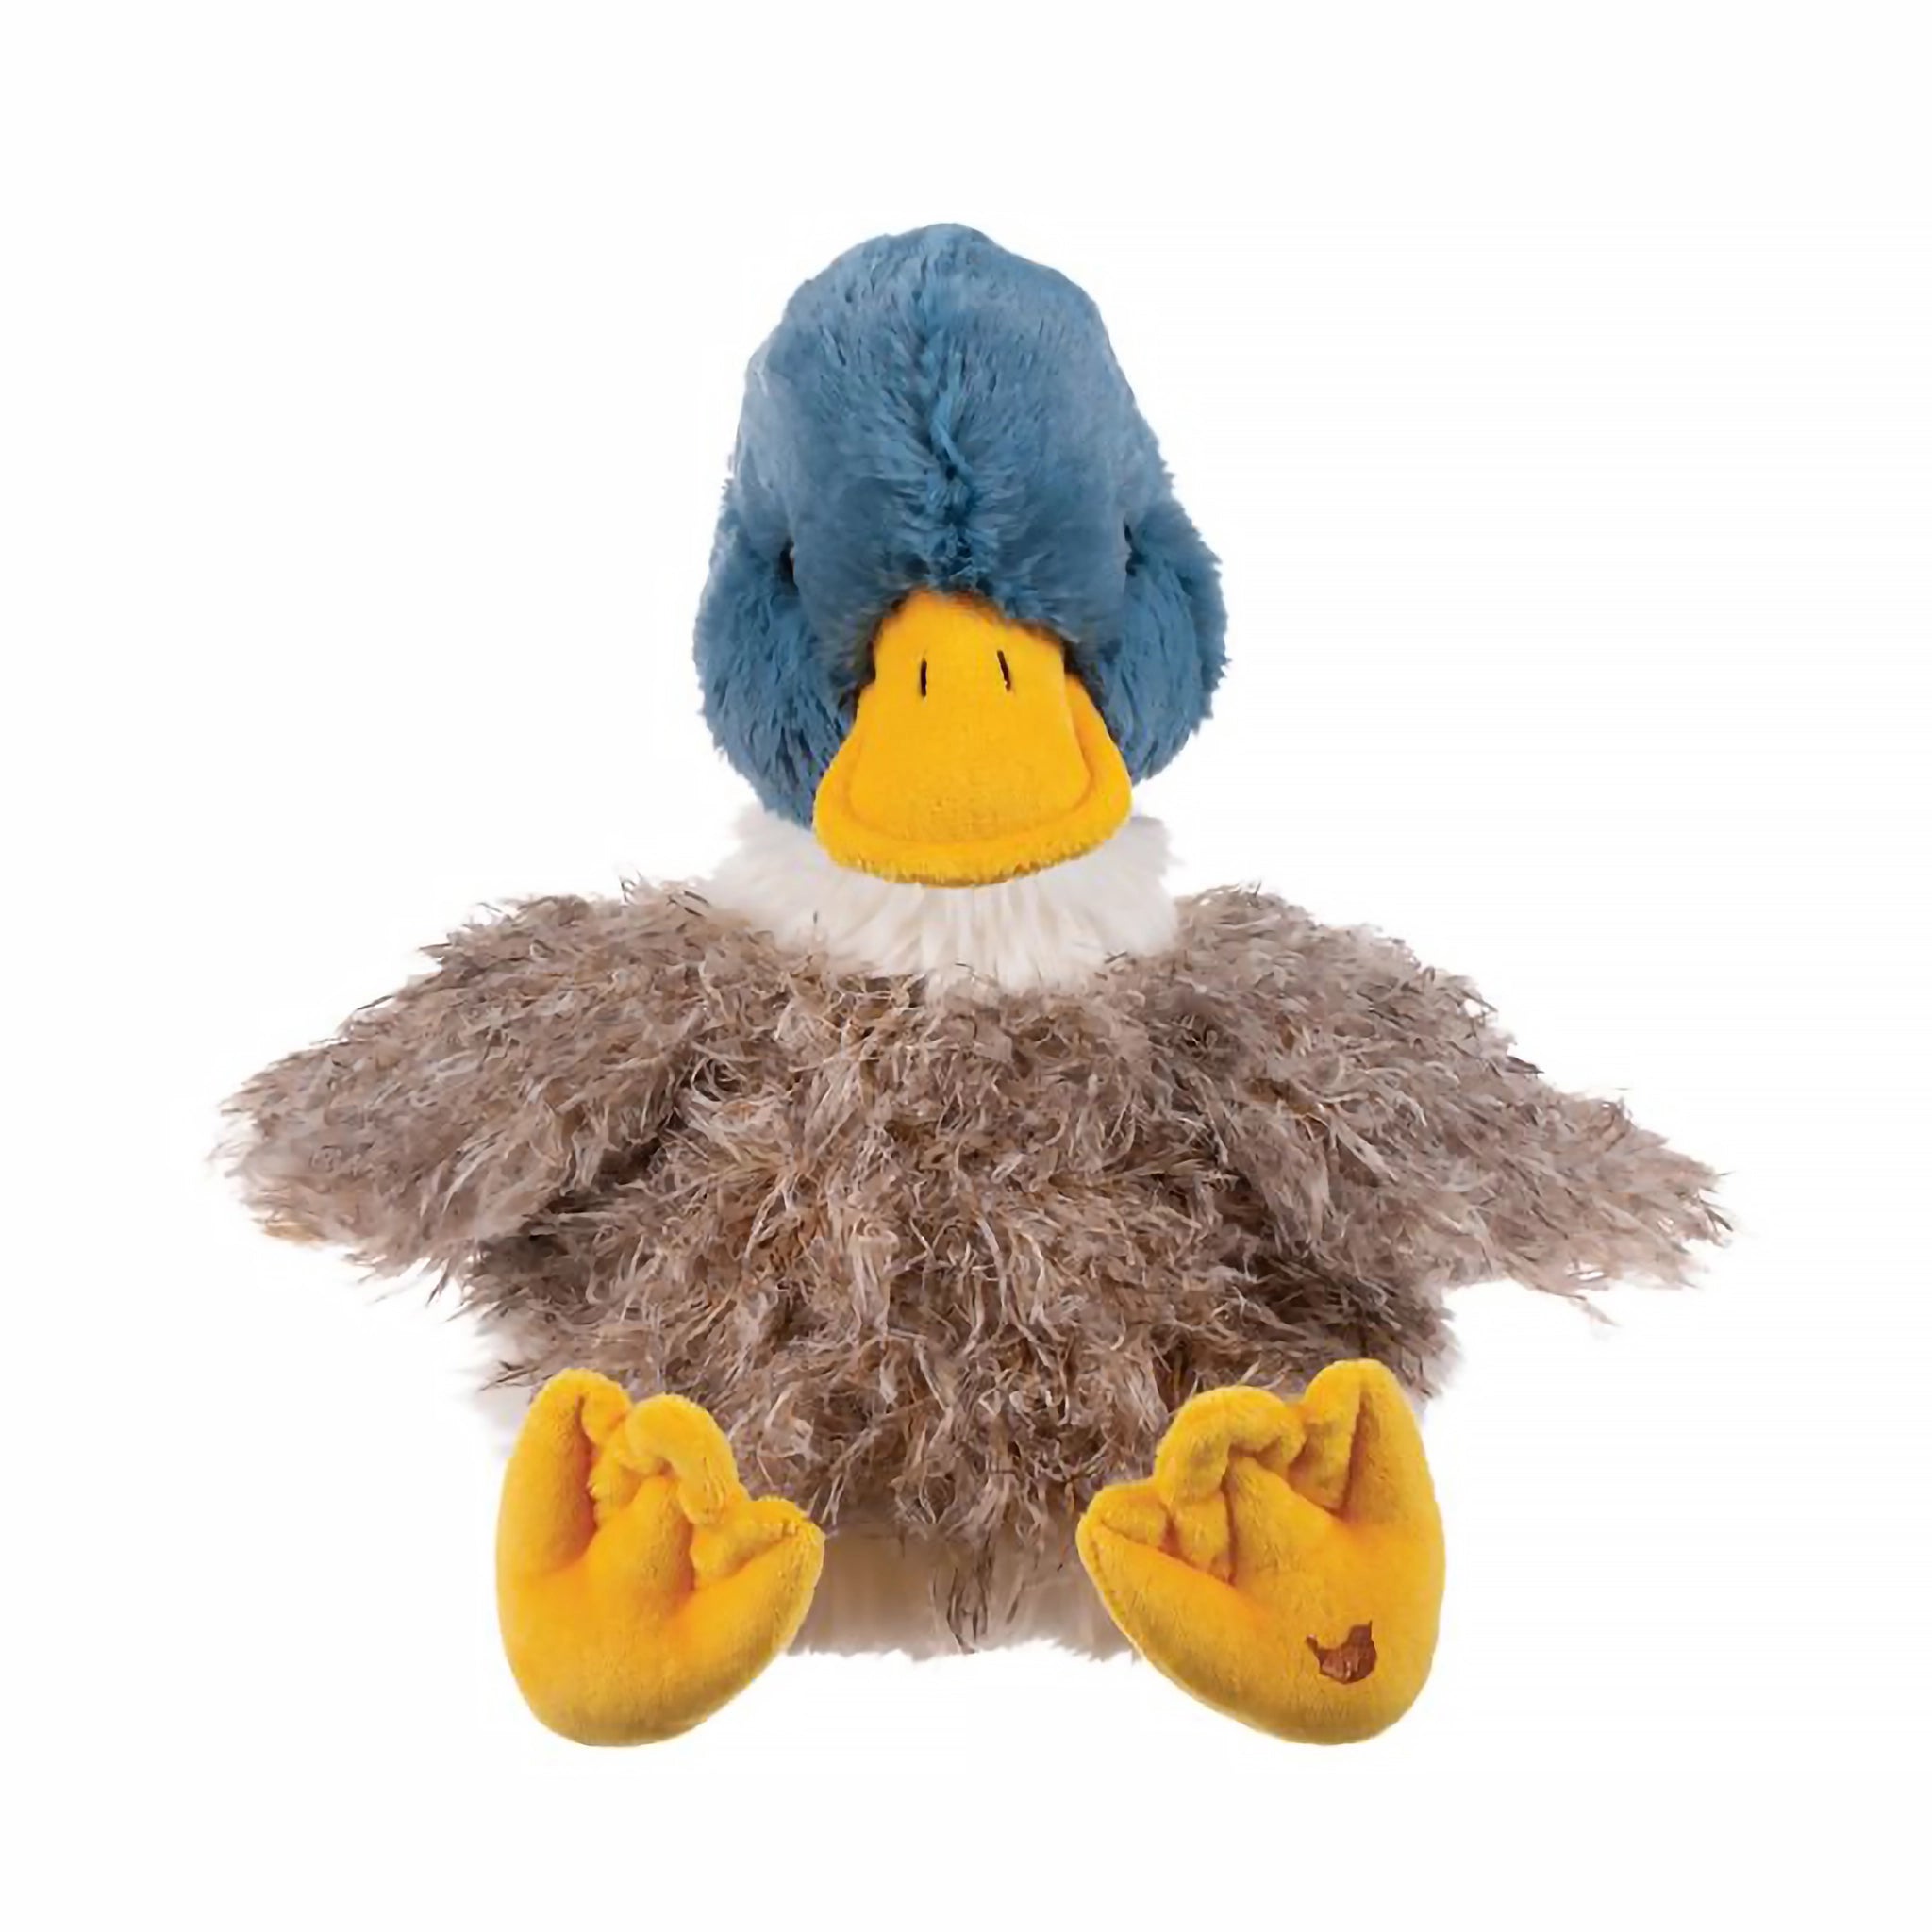 A stuffed duck plush toy with the Wrendale logo embroidered on the bottom of its foot